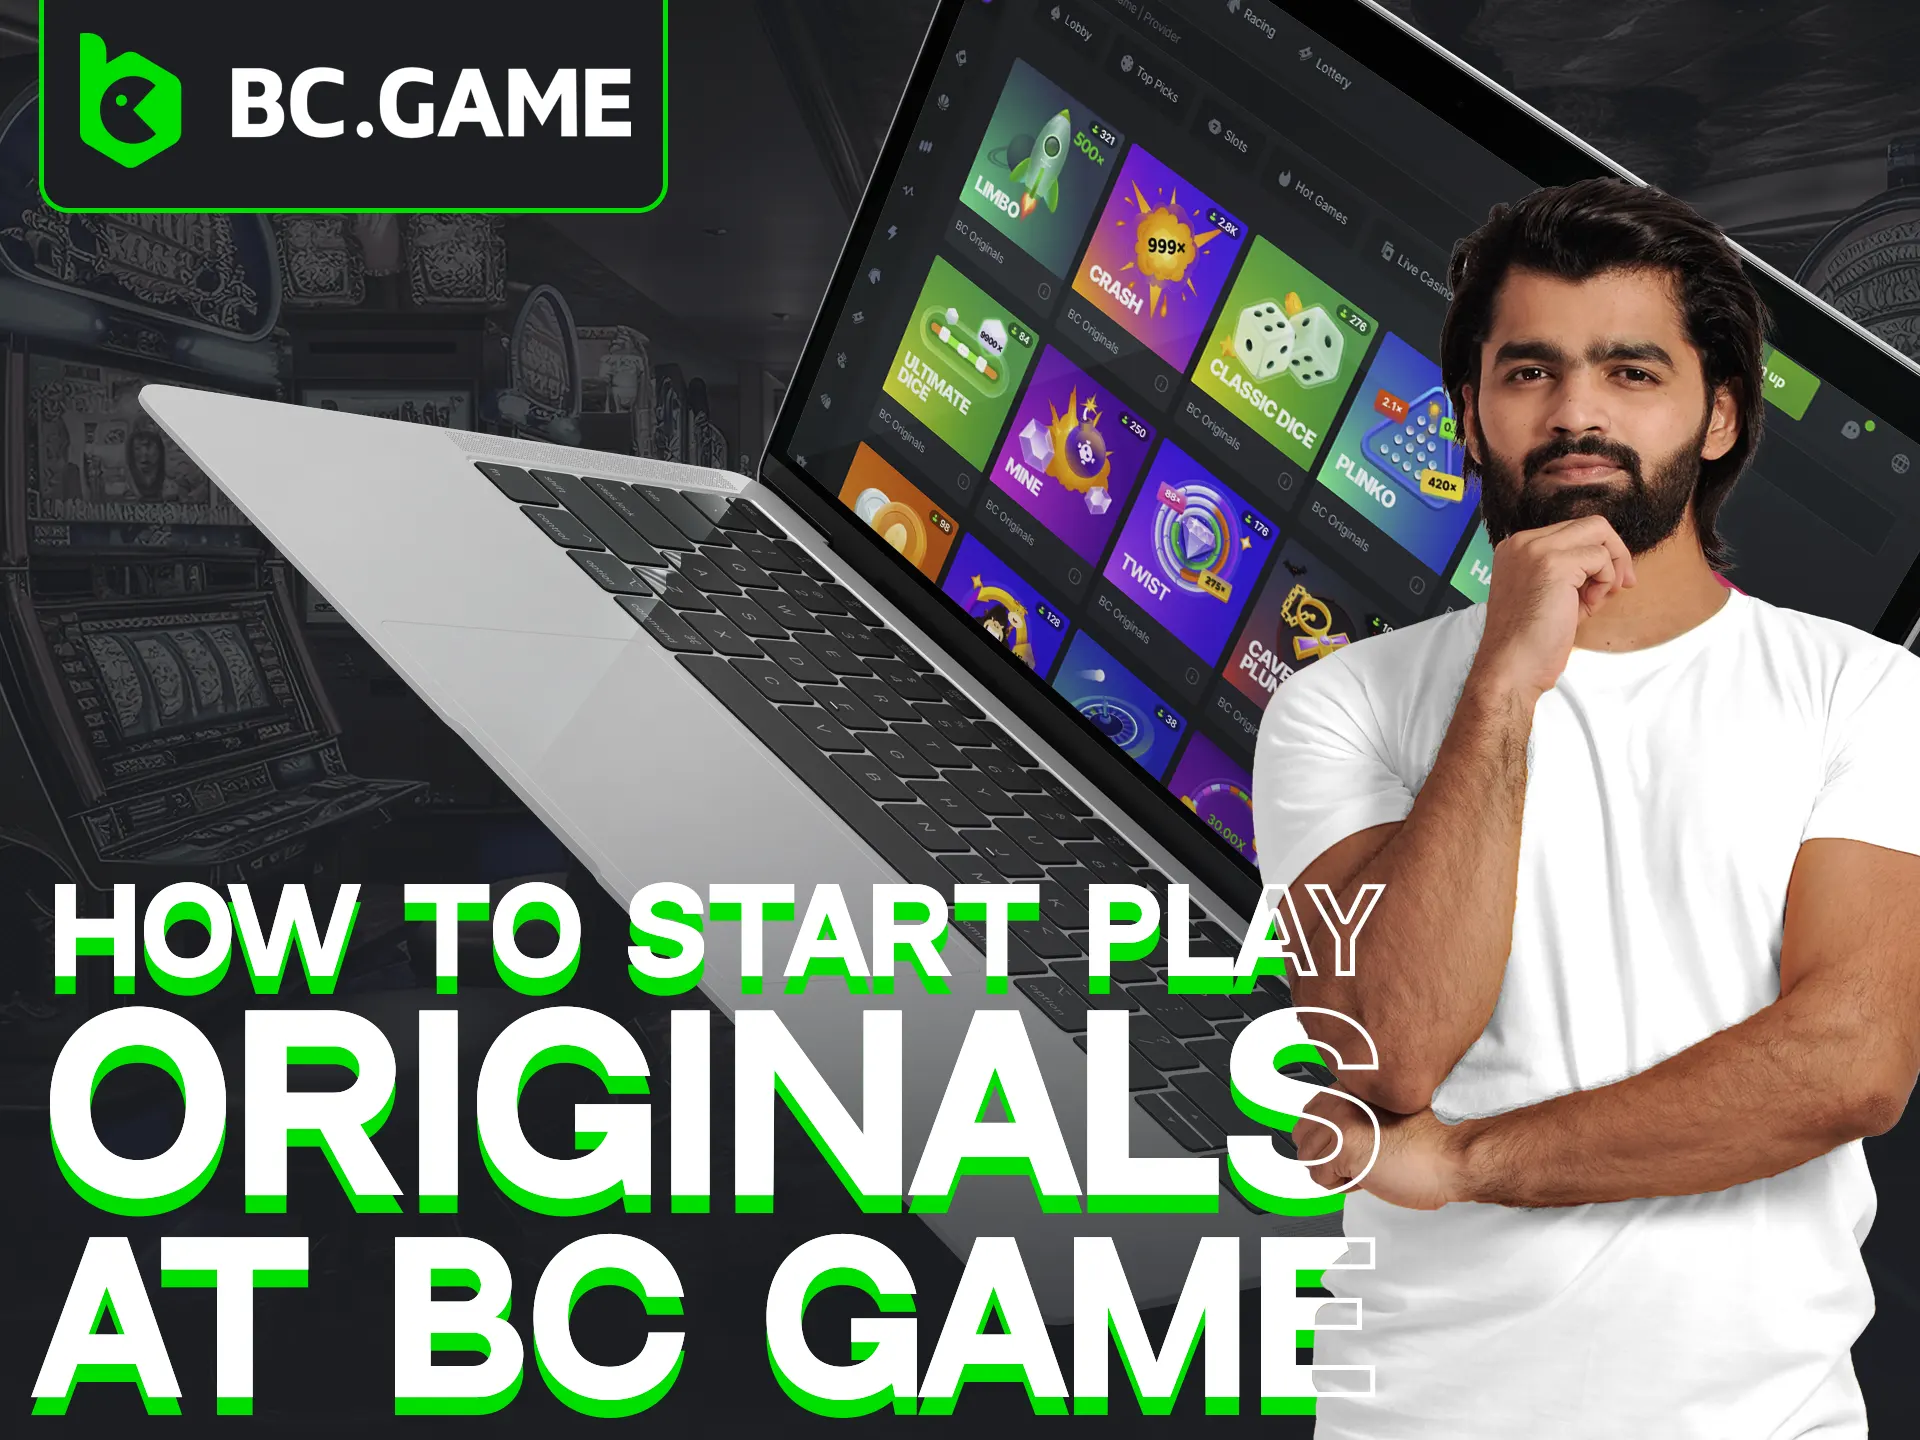 Join BC Game, deposit, play BC Originals in casino section.